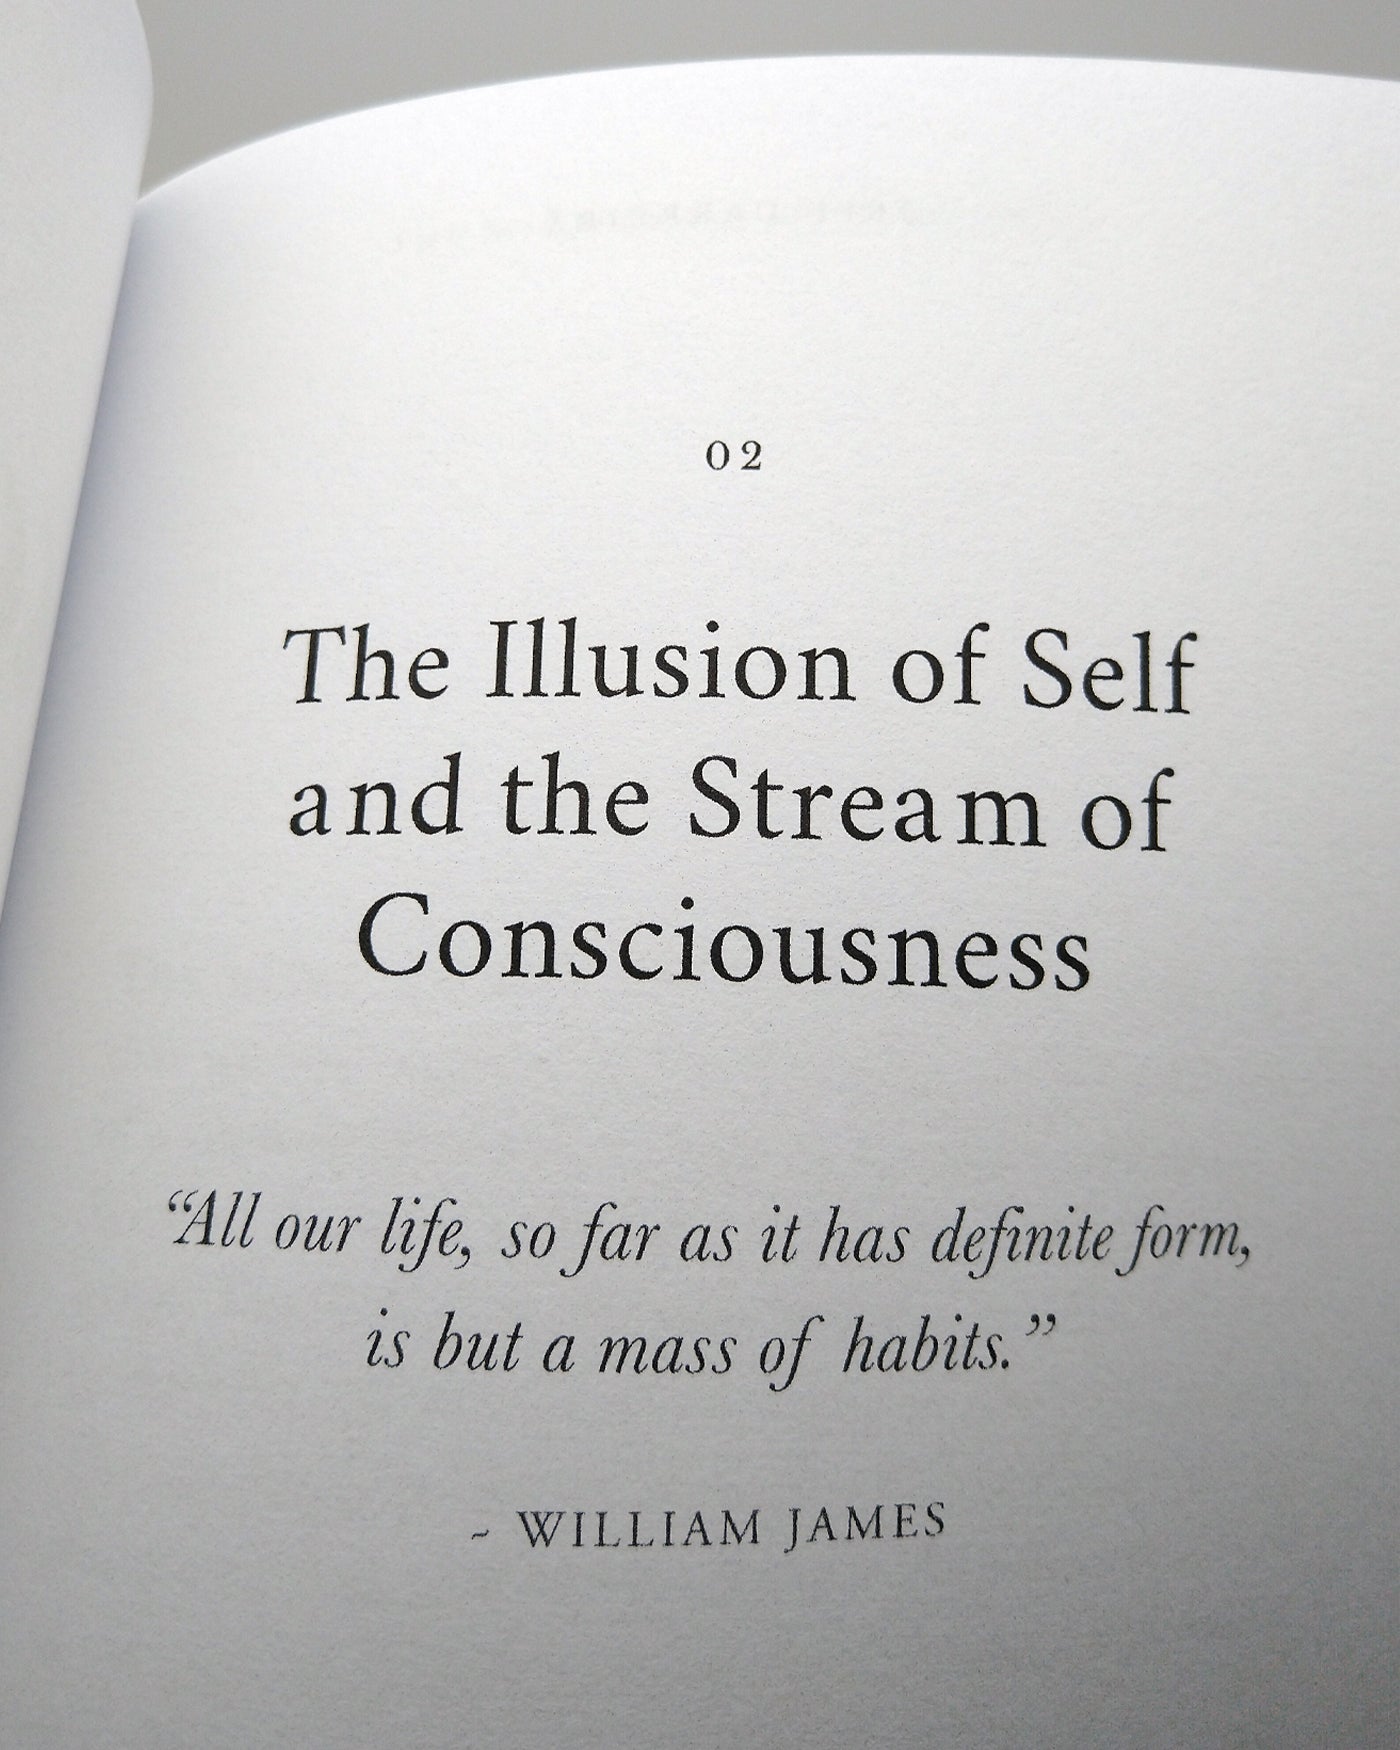 The Miracle of an Open Mind: Reflections on the Philosophy of William James